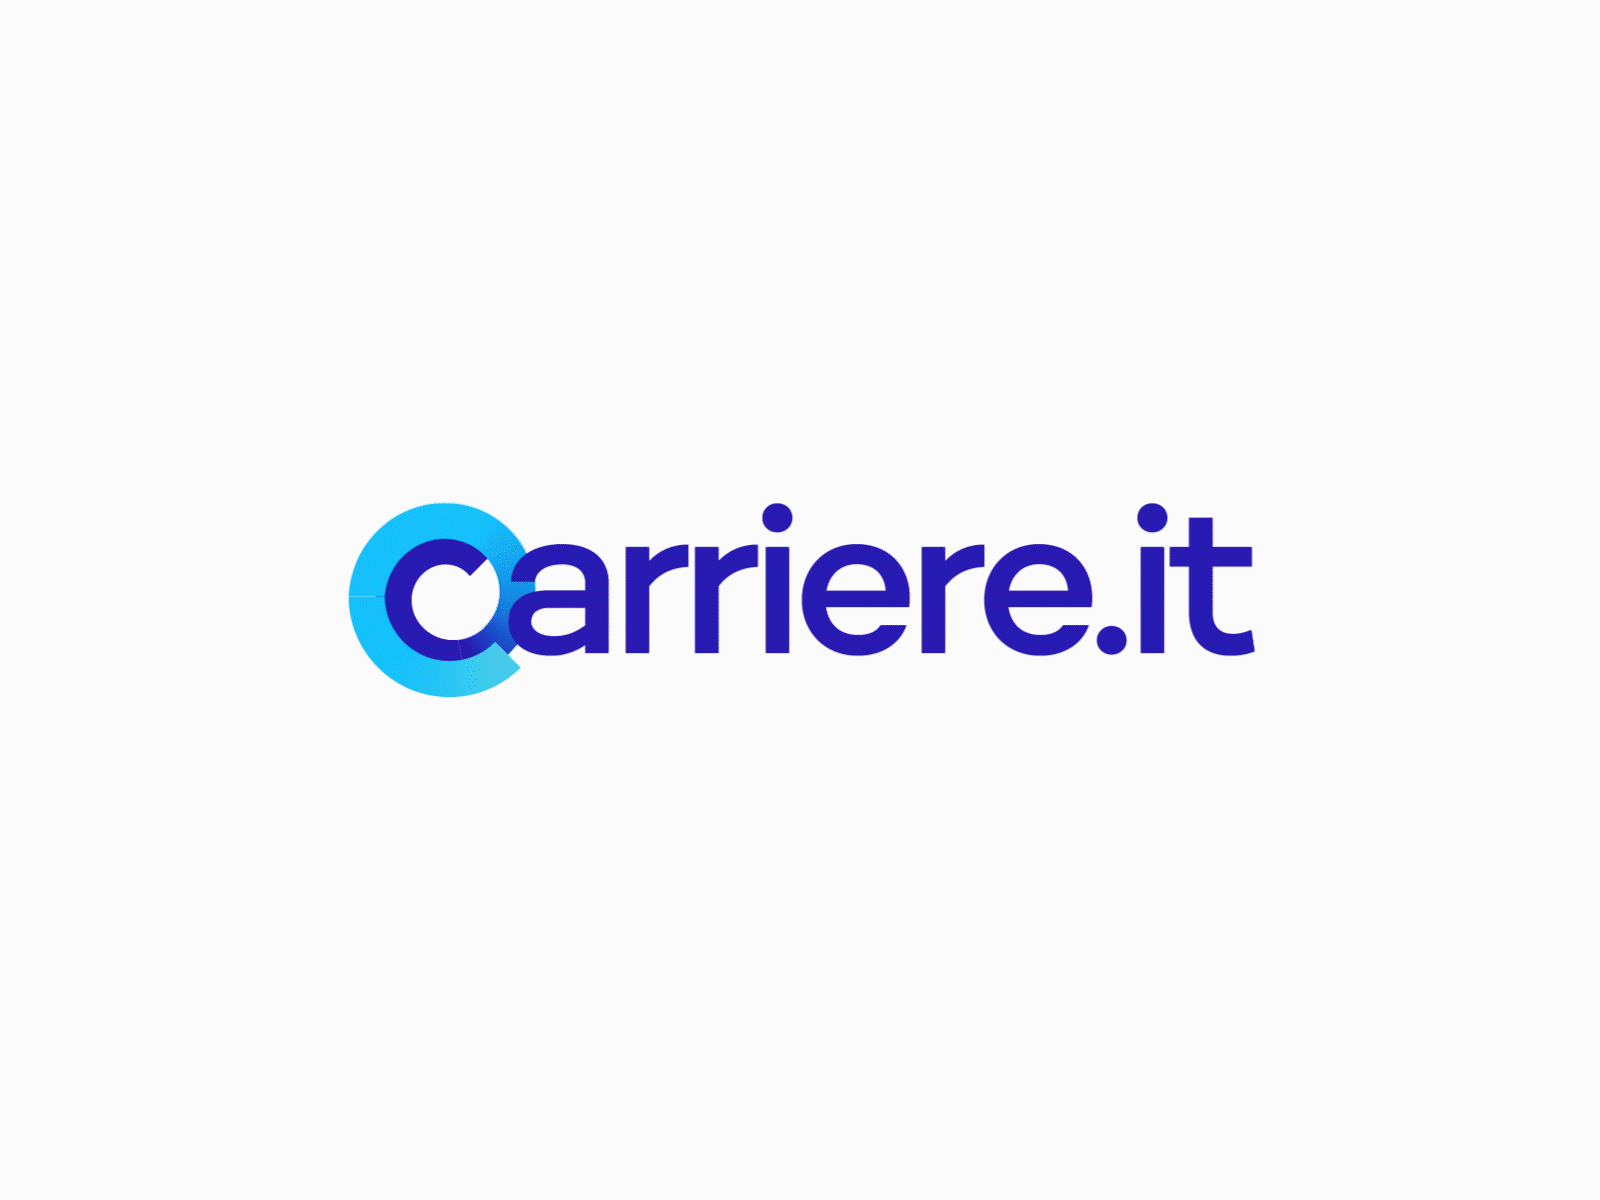 Carriere.it Logo animation